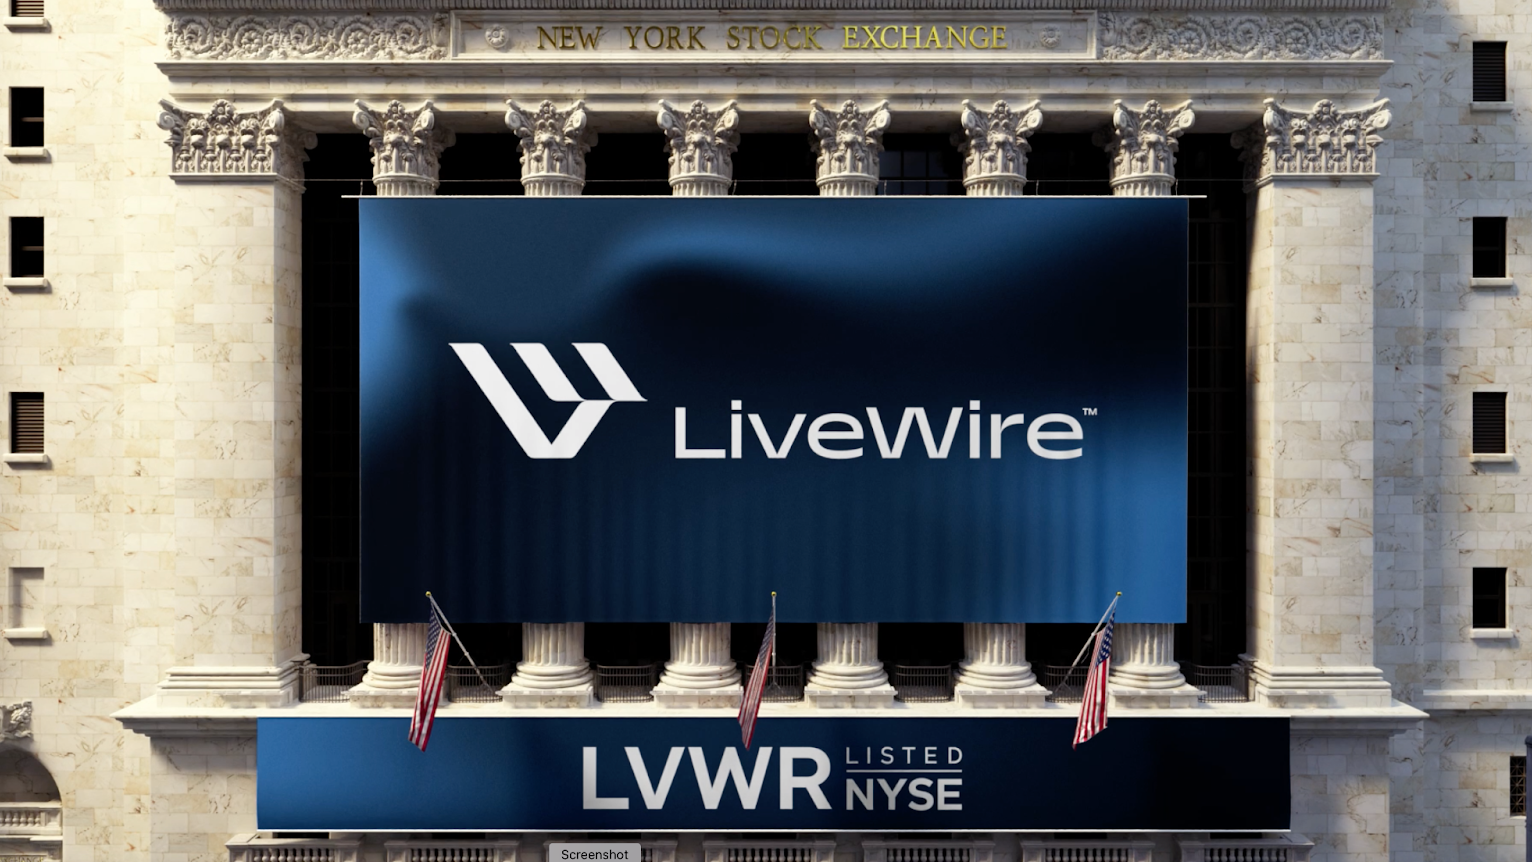 The LiveWire banner unveiling outside the NYSE